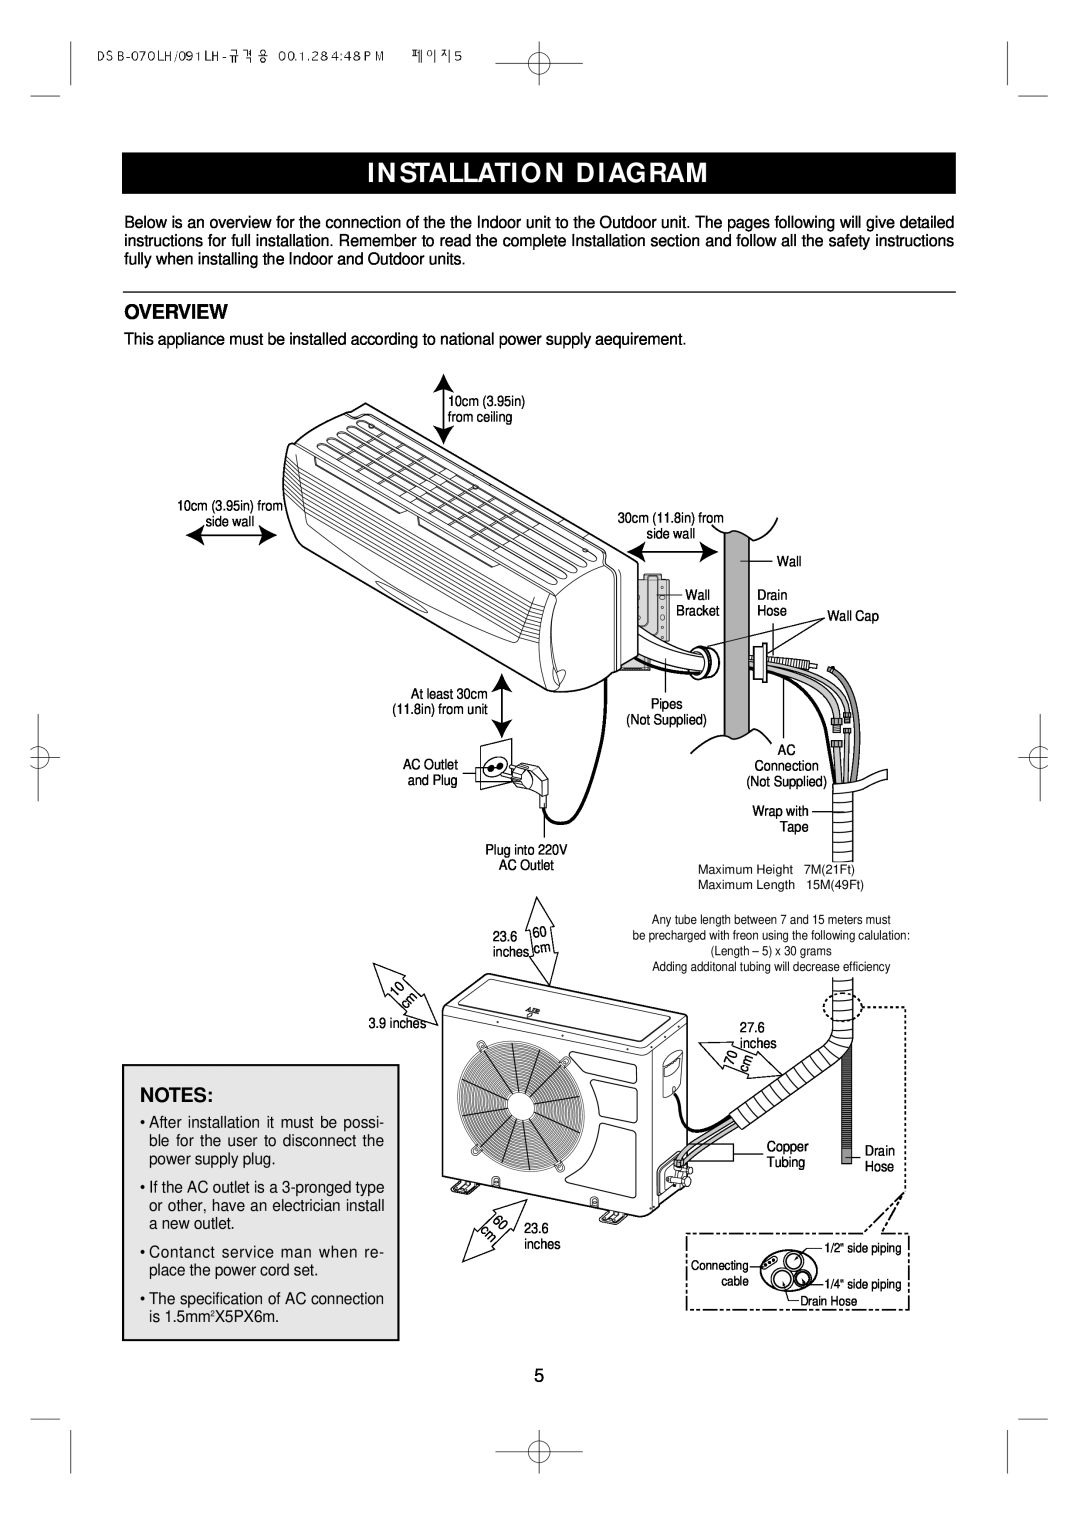 Daewoo DSB-071LH, Split Airconditioning System owner manual Installation Diagram, Overview, Notes 